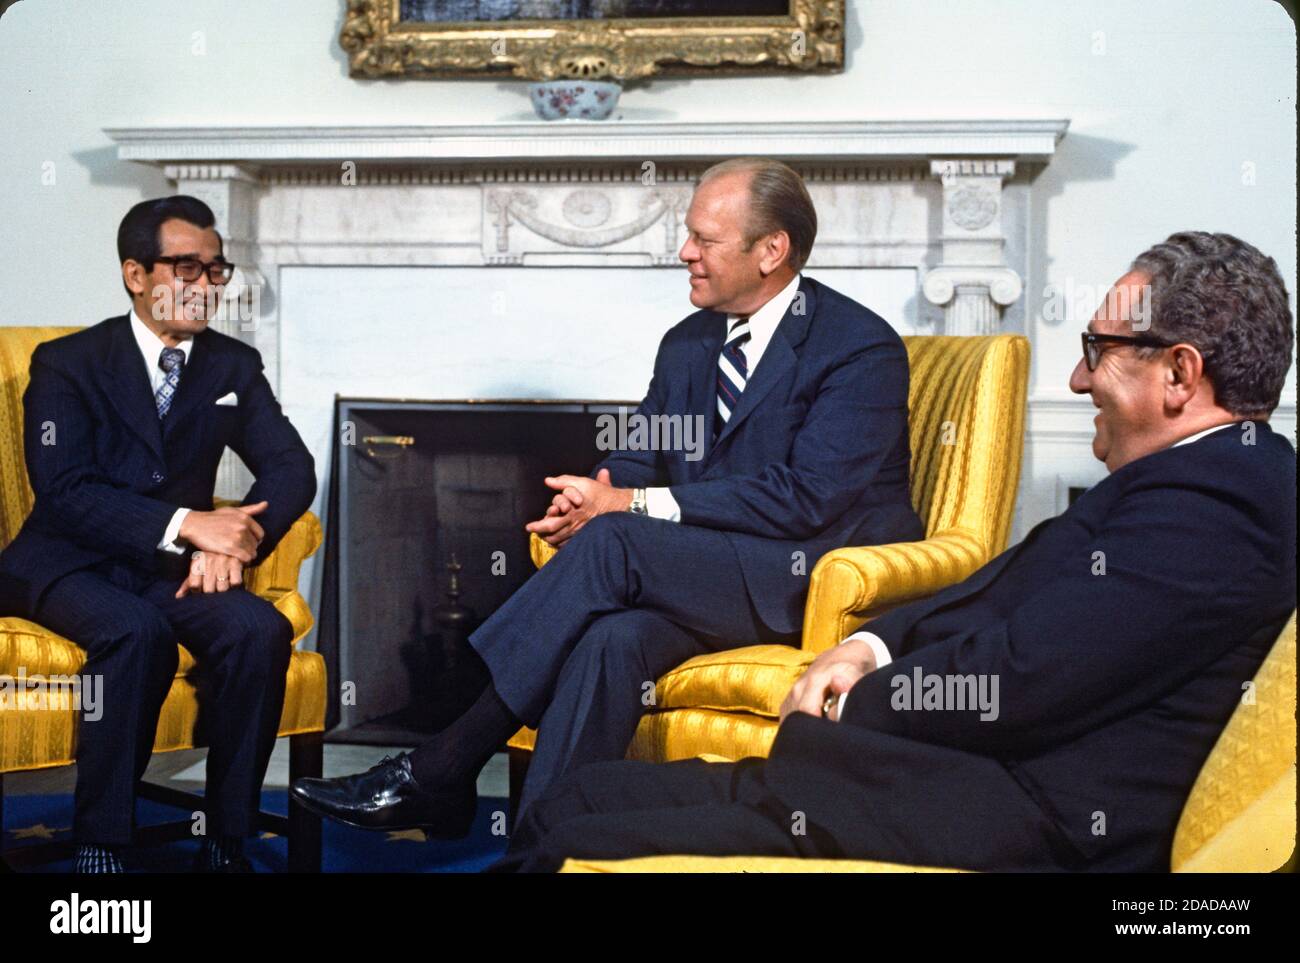 United States President Gerald R. Ford, second right, meets Tran Kim Phuong, Ambassador of the Republic of South Vietnam to the U.S., second left, in the Oval Office of the White House in Washington, DC on August 9, 1974. At right is Dr. Henry A. Kissinger, Secretary of State and Assistant to the President for National Security Affairs.Credit: Arnie Sachs/CNP | usage worldwide Stock Photo